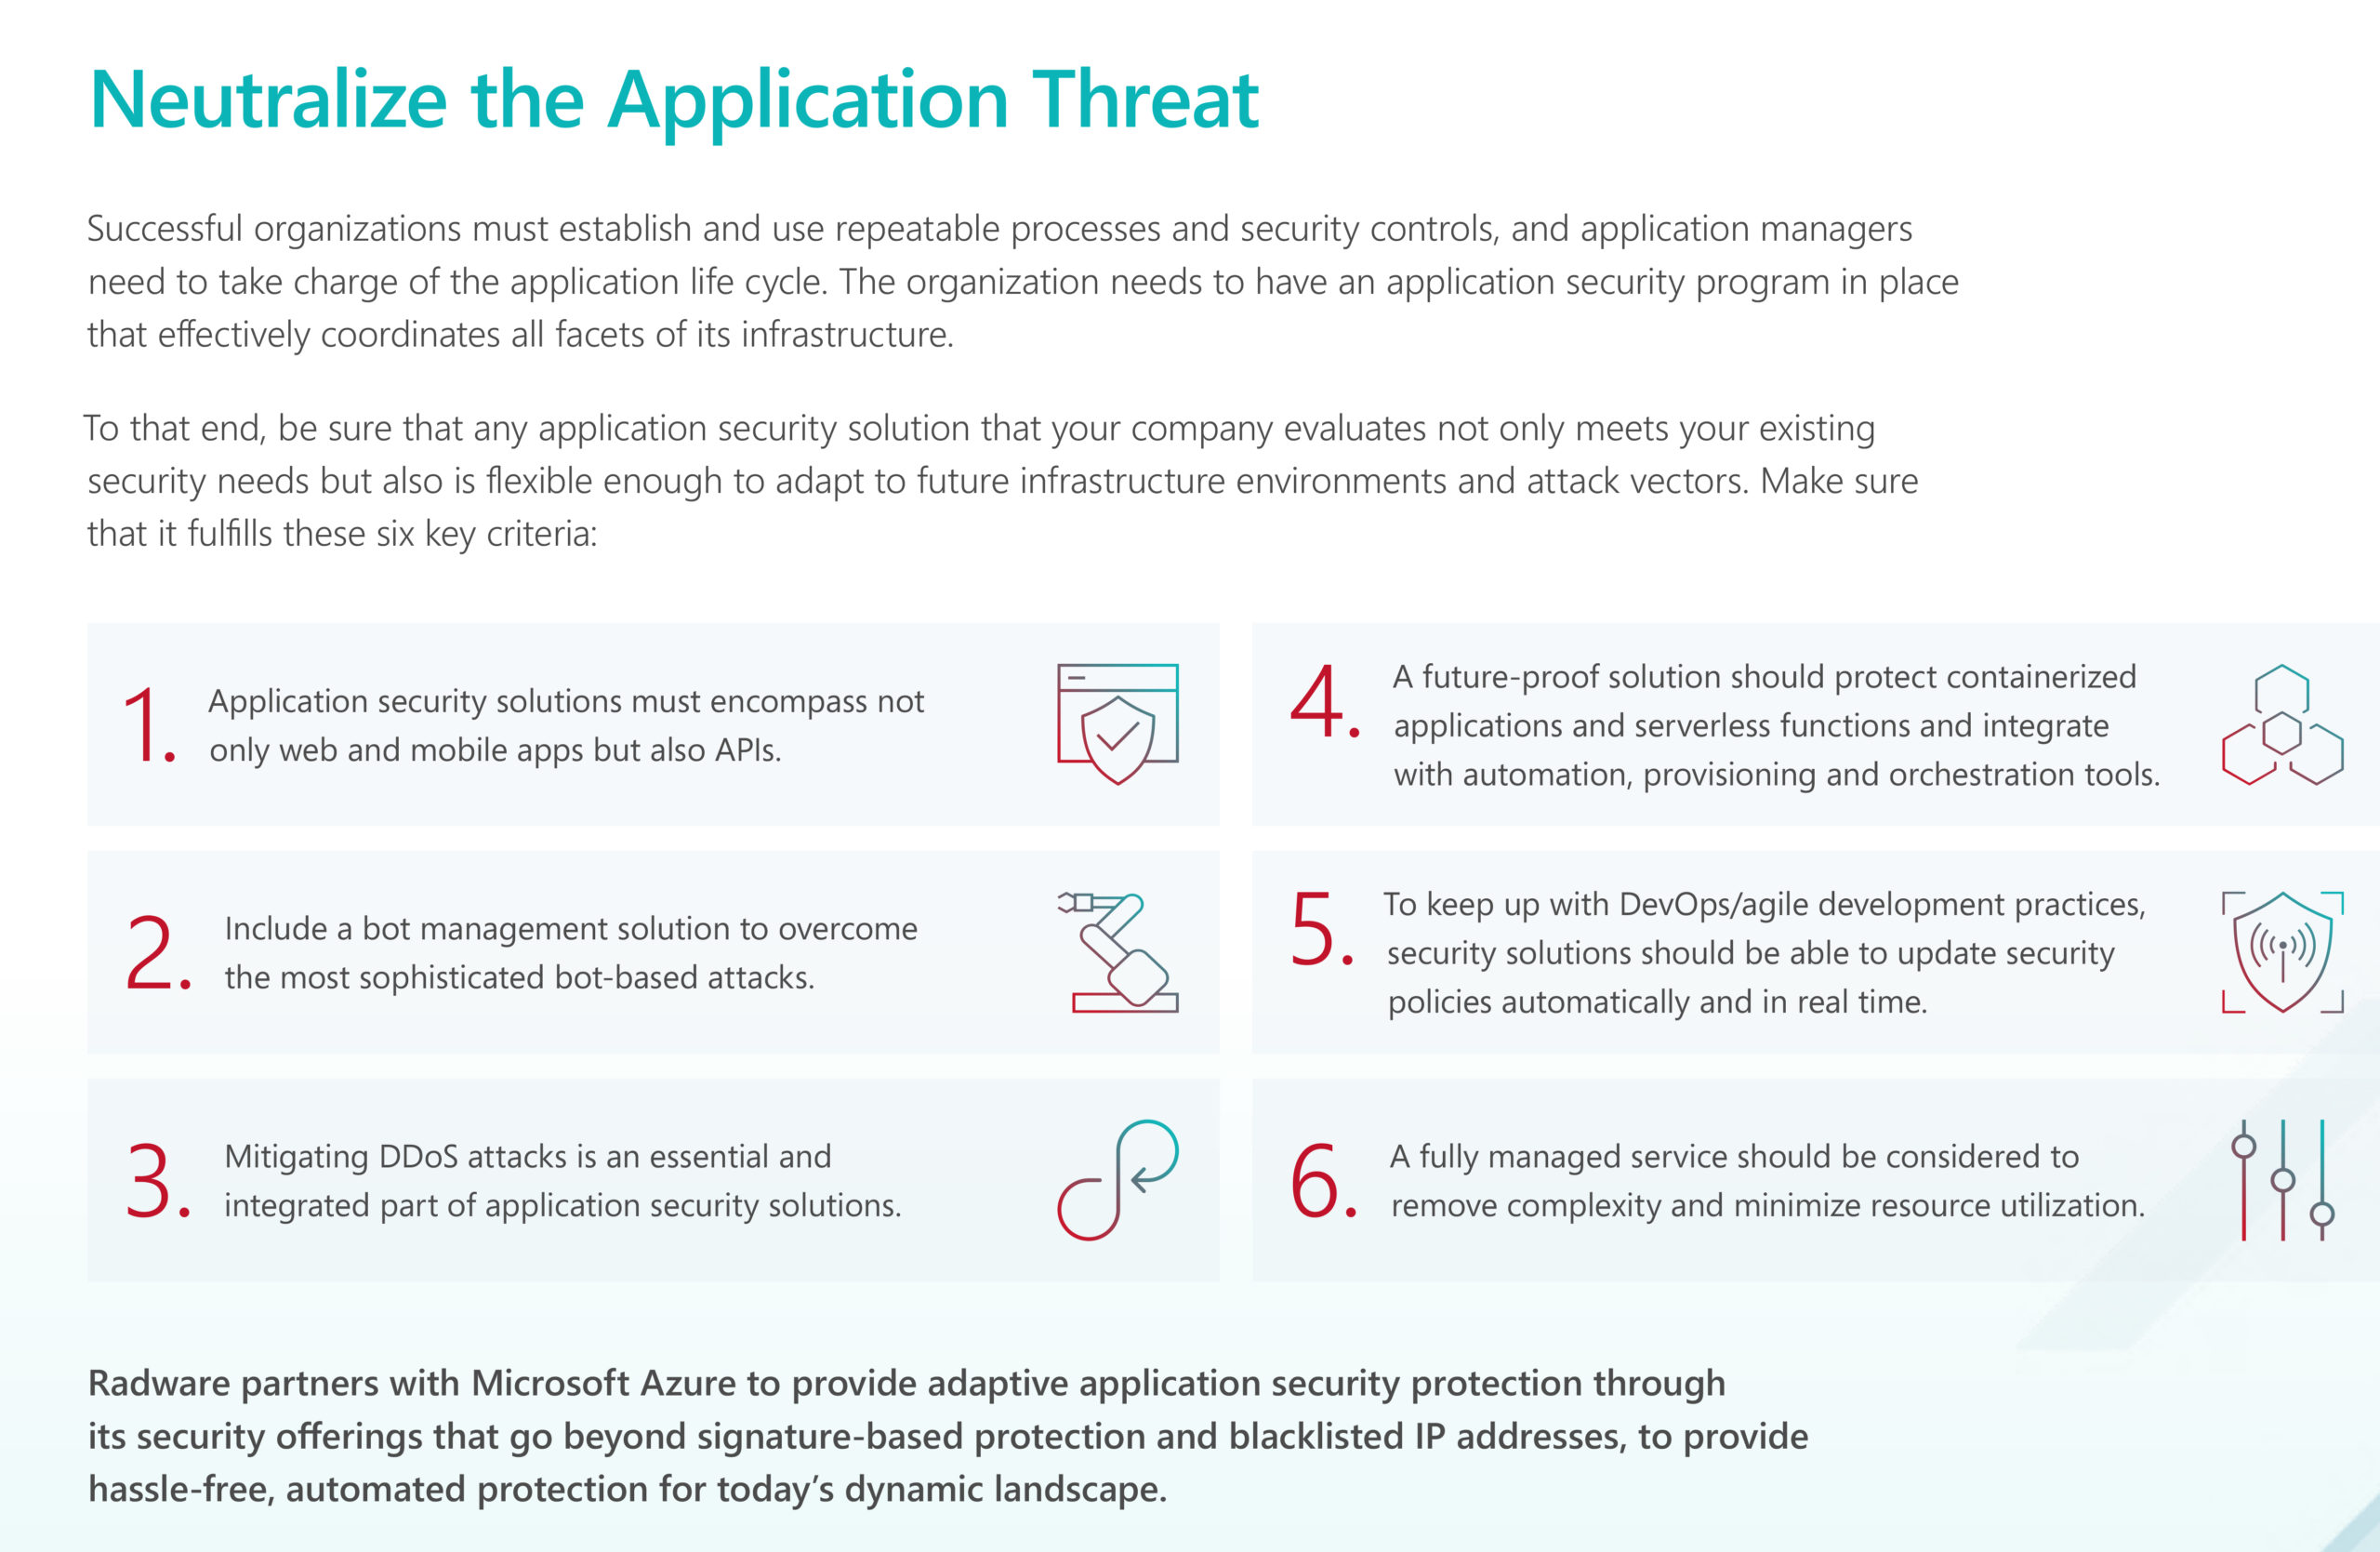 Details on security solutions offered by Radware Security for Azure